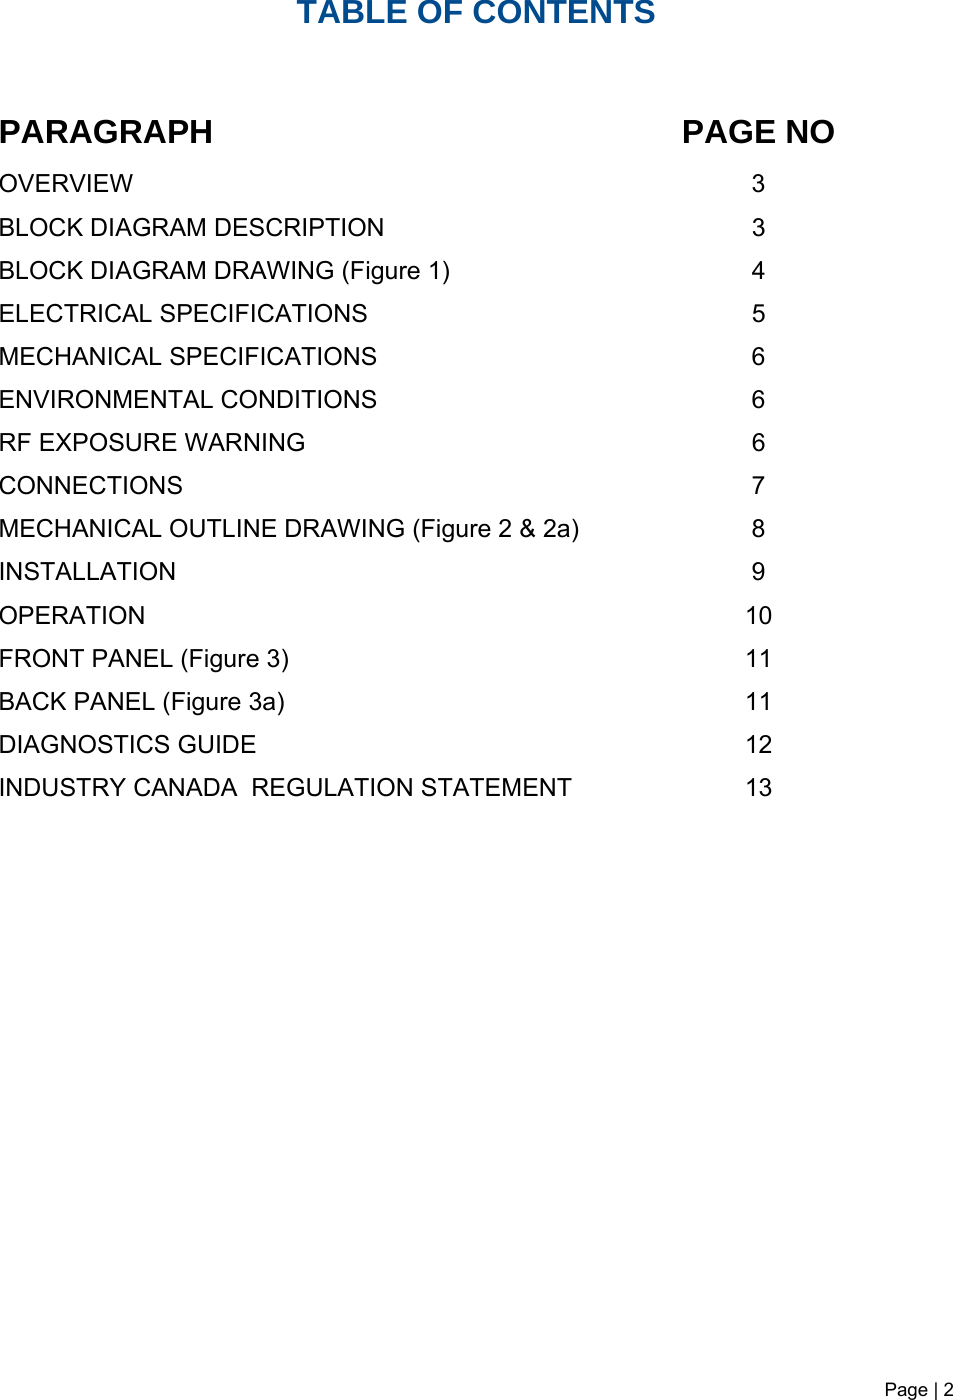 Page | 2   TABLE OF CONTENTS   PARAGRAPH PAGE NO OVERVIEW   3 BLOCK DIAGRAM DESCRIPTION 3 BLOCK DIAGRAM DRAWING (Figure 1)  4 ELECTRICAL SPECIFICATIONS     5  MECHANICAL SPECIFICATIONS  6 ENVIRONMENTAL CONDITIONS   6  RF EXPOSURE WARNING  6 CONNECTIONS 7 MECHANICAL OUTLINE DRAWING (Figure 2 &amp; 2a)  8  INSTALLATION 9 OPERATION 10  FRONT PANEL (Figure 3) BACK PANEL (Figure 3a) 11  11 DIAGNOSTICS GUIDE INDUSTRY CANADA  REGULATION STATEMENT  12 13                   